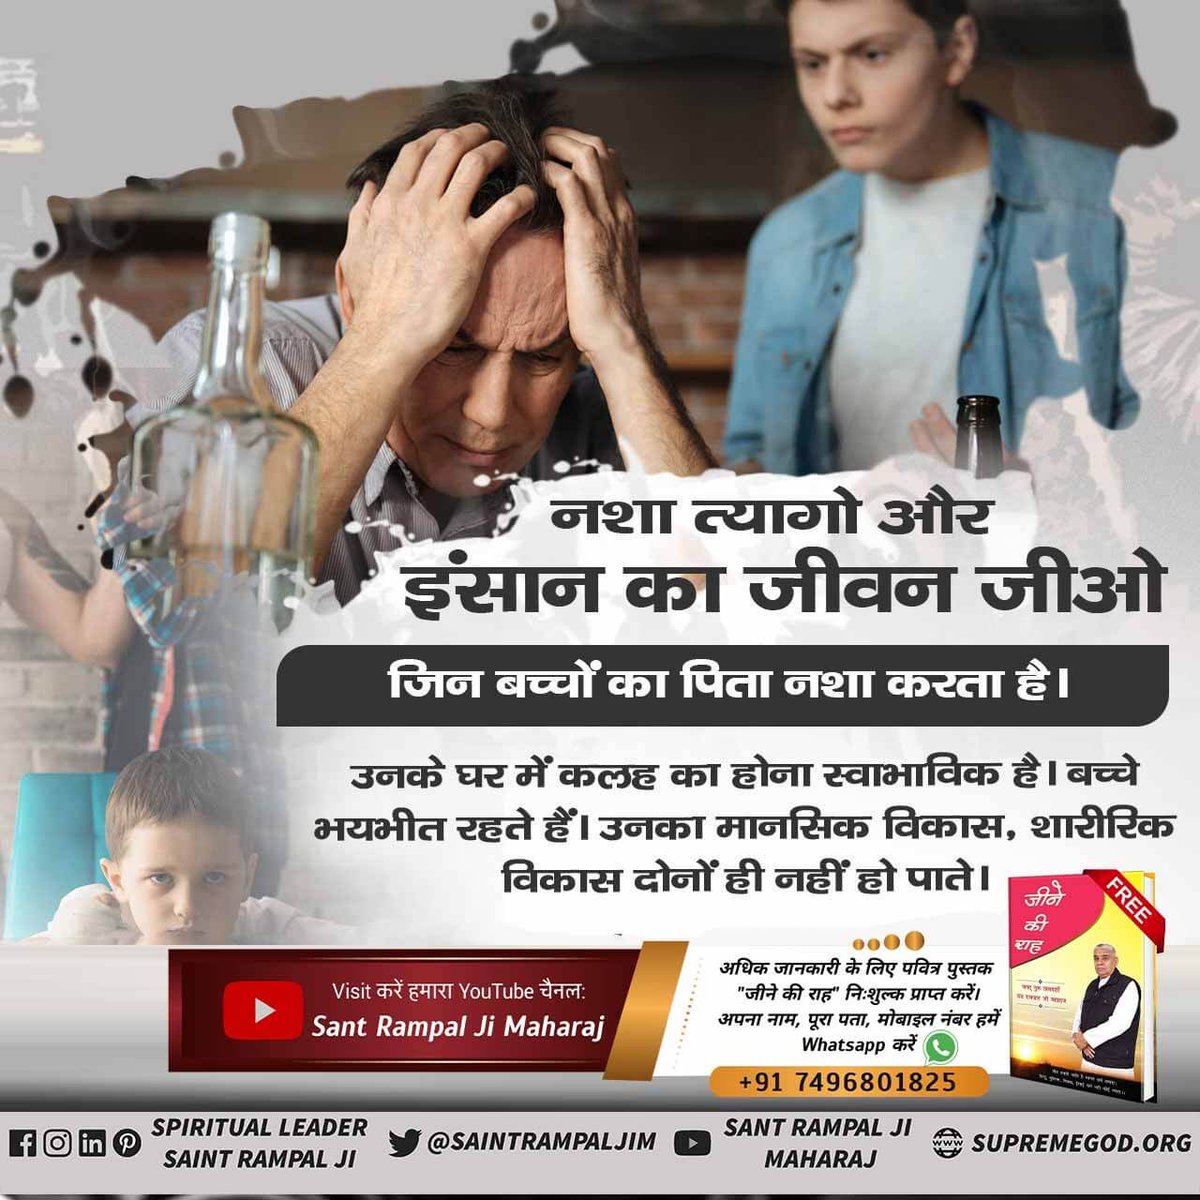 #नशा_एकअभिशापहै_कैसे_मुक्तिहो Children whose father is addicted to drugs, there is a possibility of quarrels in their house, children are habituated, their mental development as well as physical development is hampered, they should give up addiction. #ThursdayMotivation